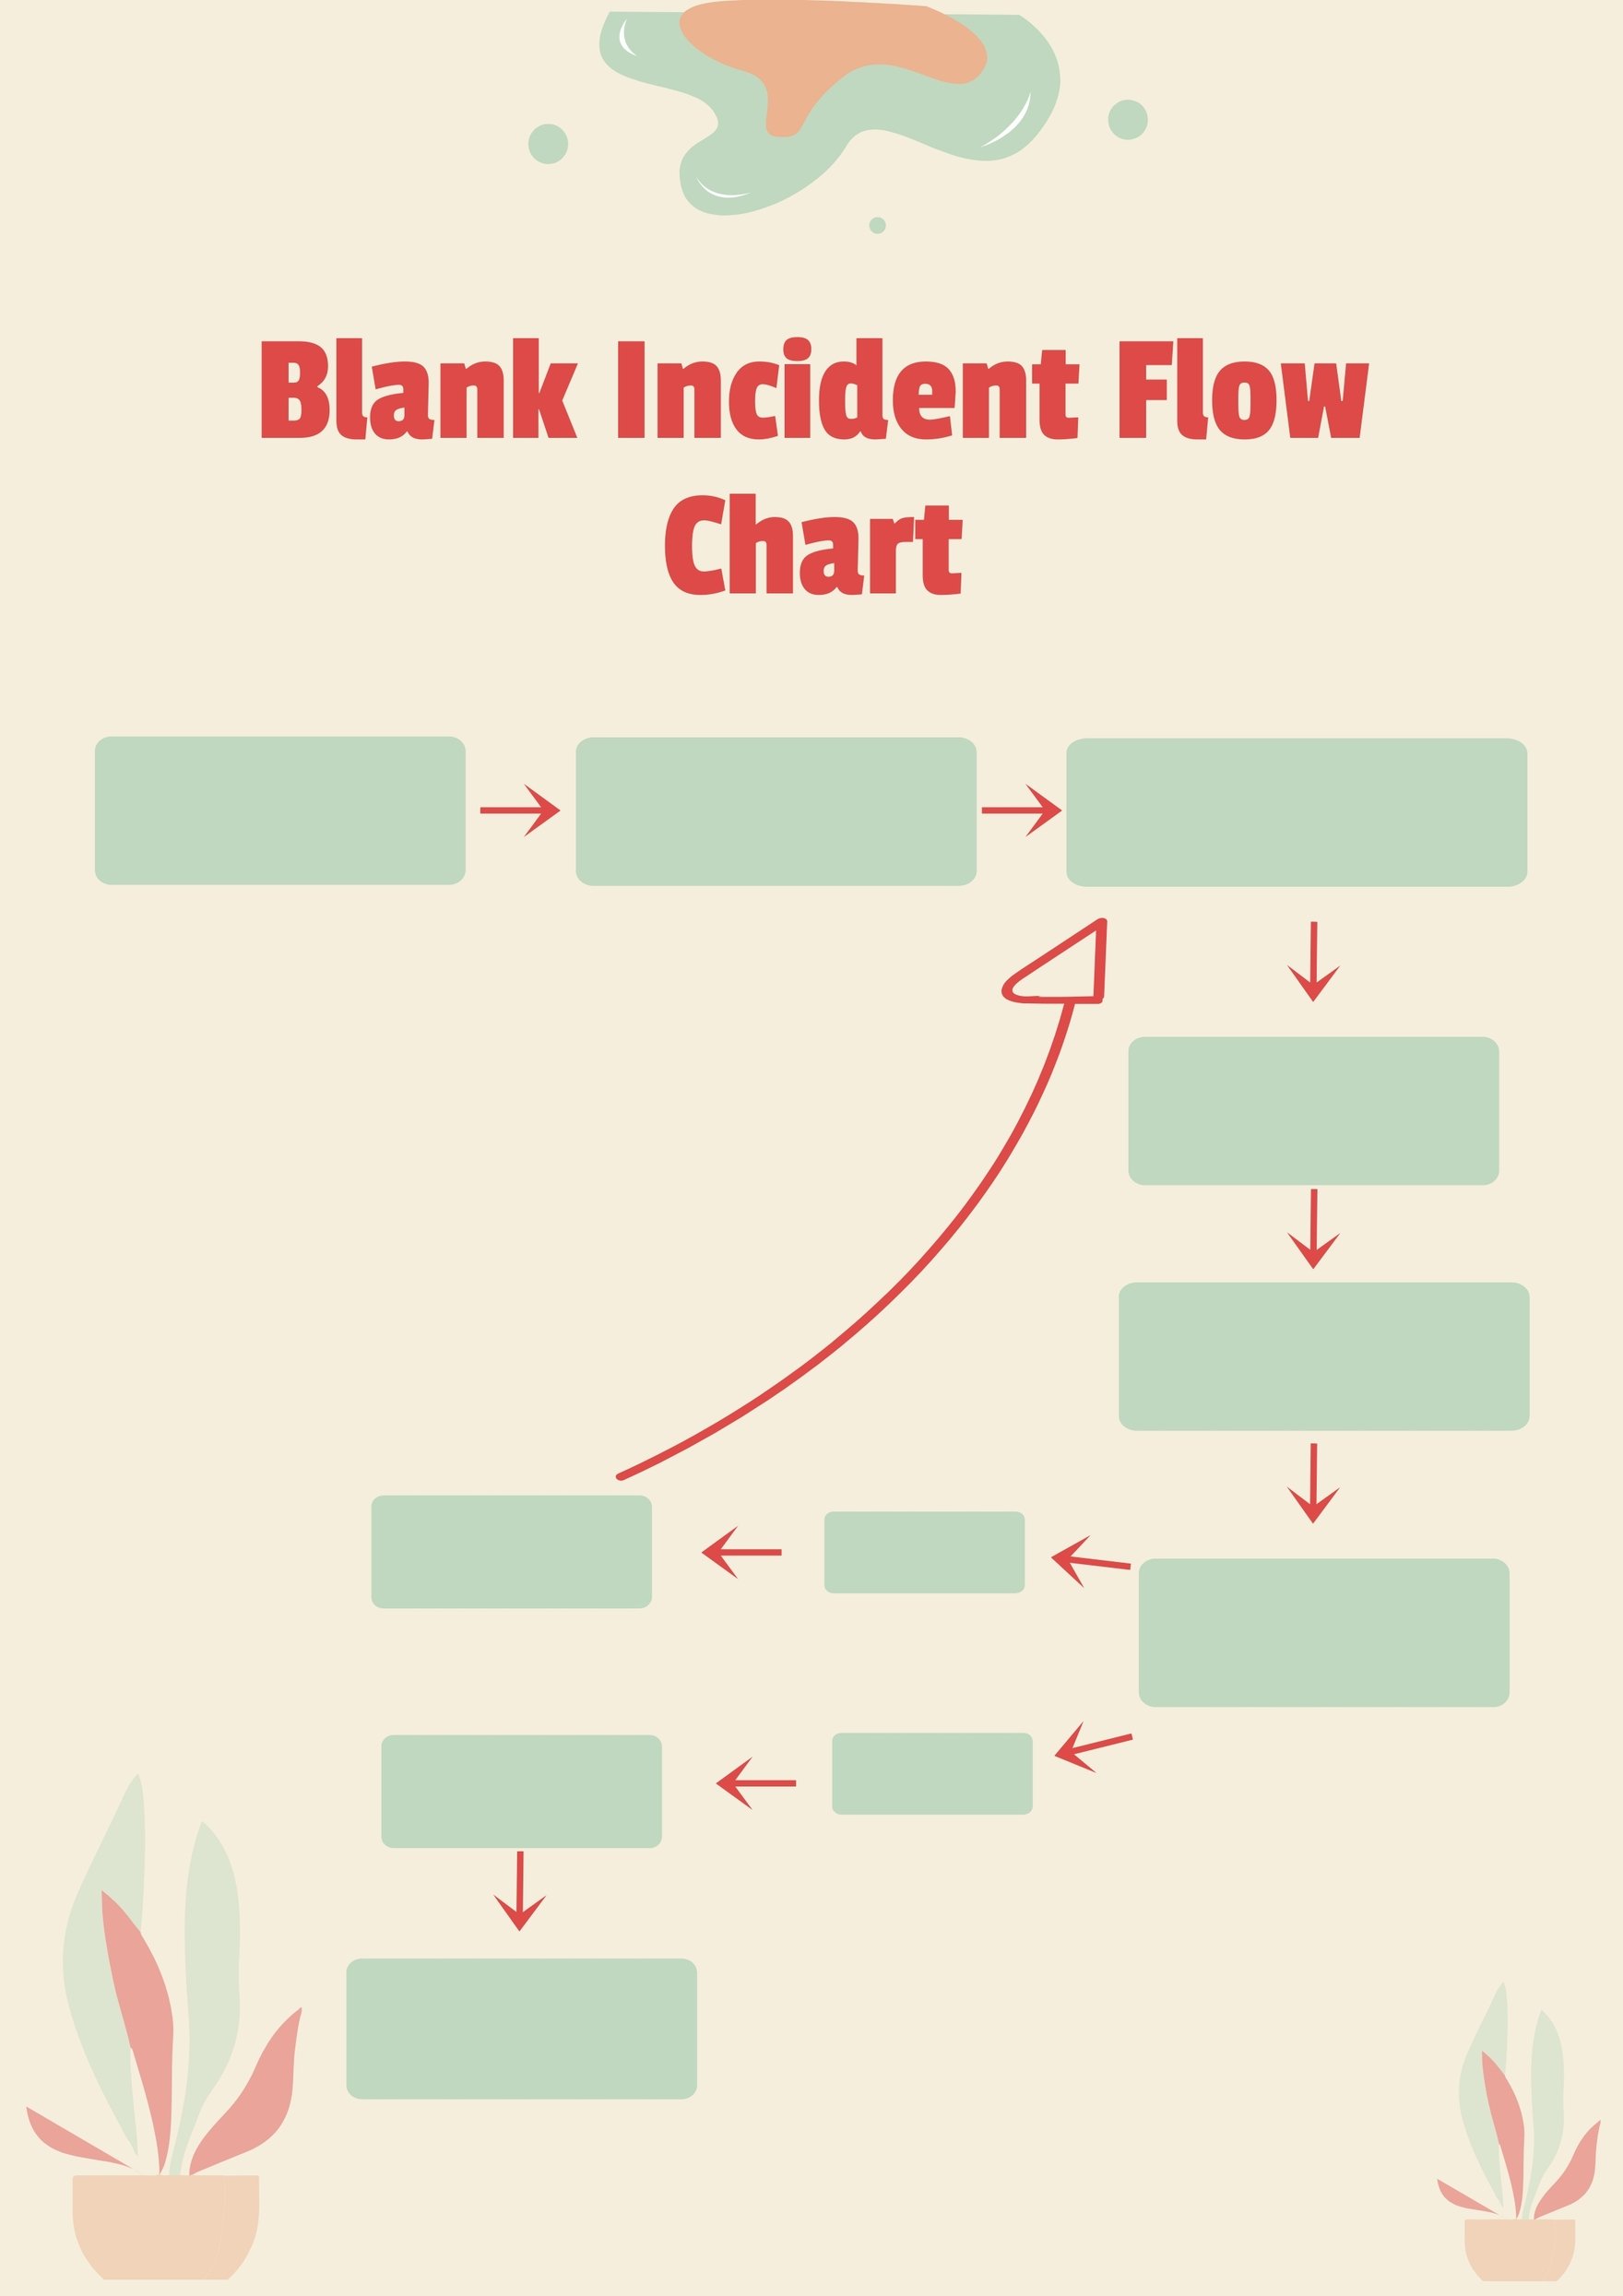 Blank Incident Flow Chart